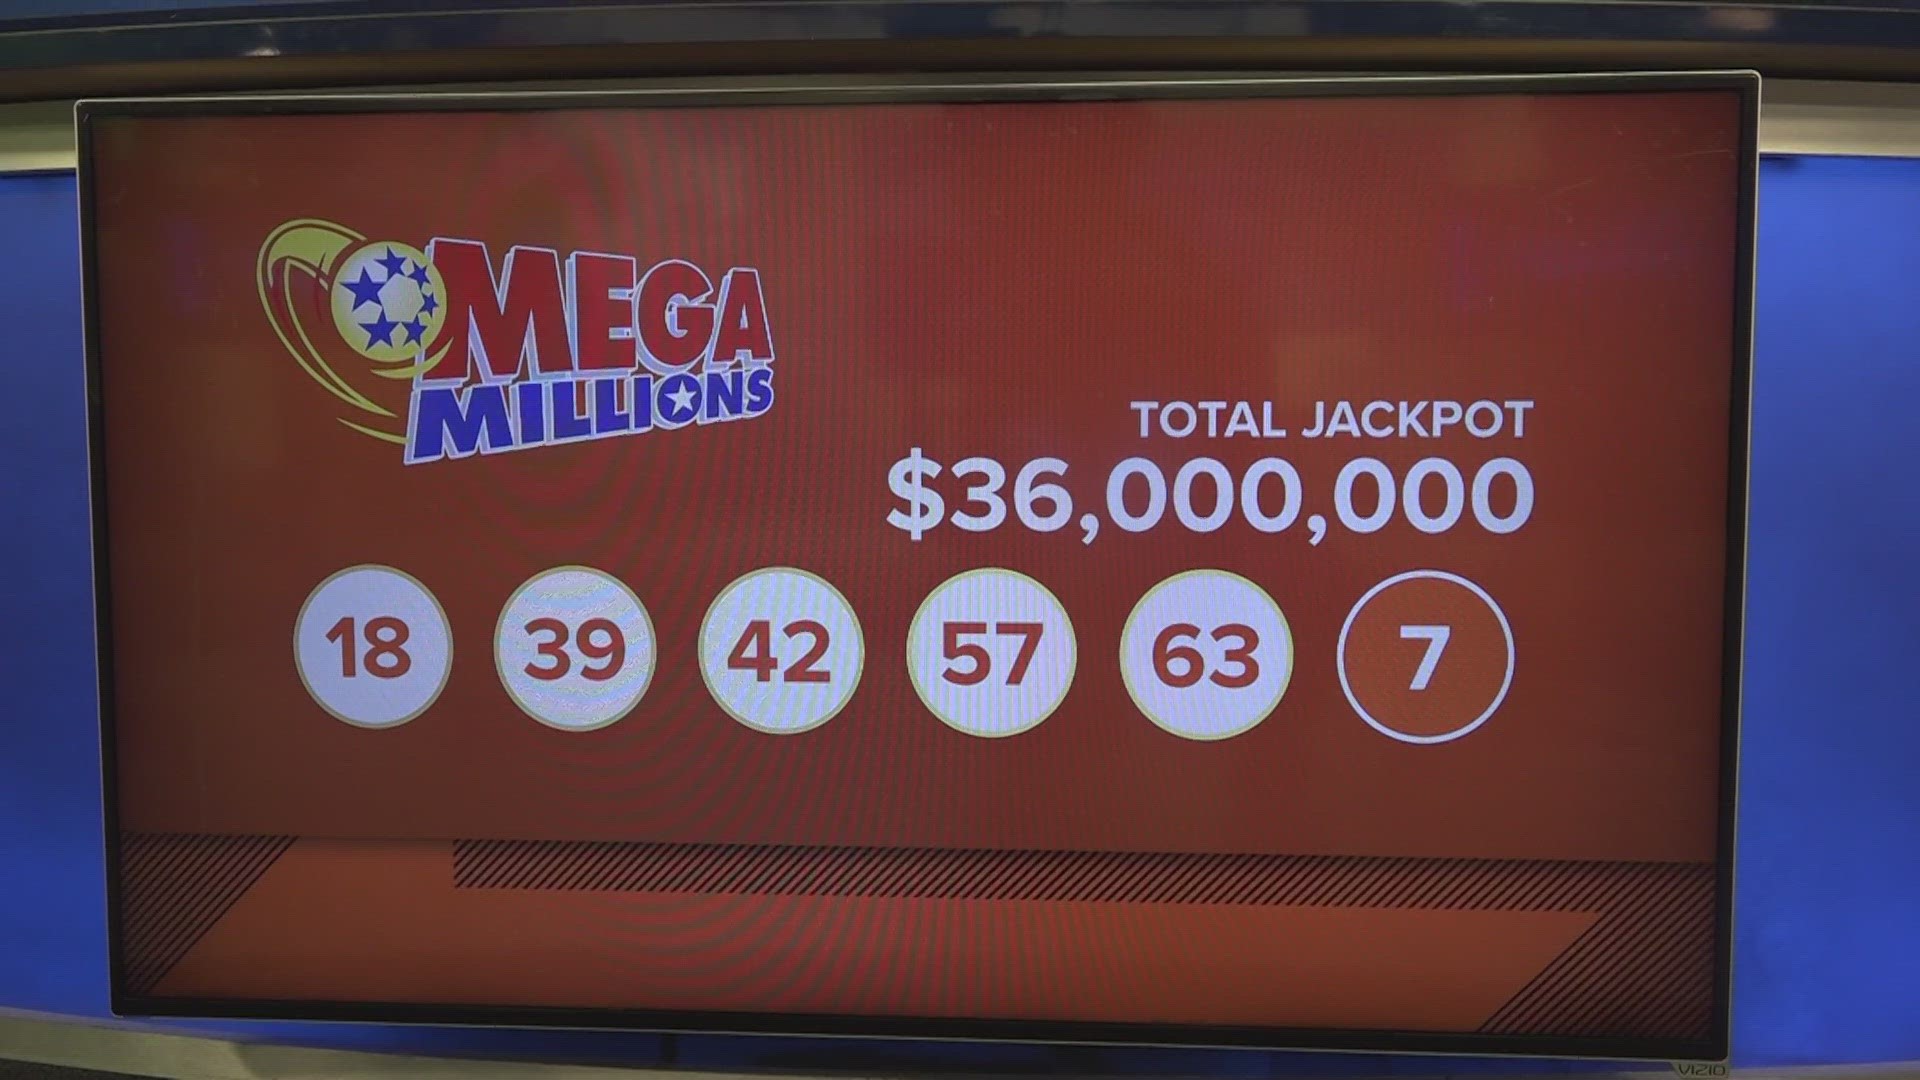 The jackpot for the winning Mega Millions ticket amounts to $36 million as the winning numbers of the drawing were: 18, 39, 42, 57, 63 Mega Ball and Megaplier 7.